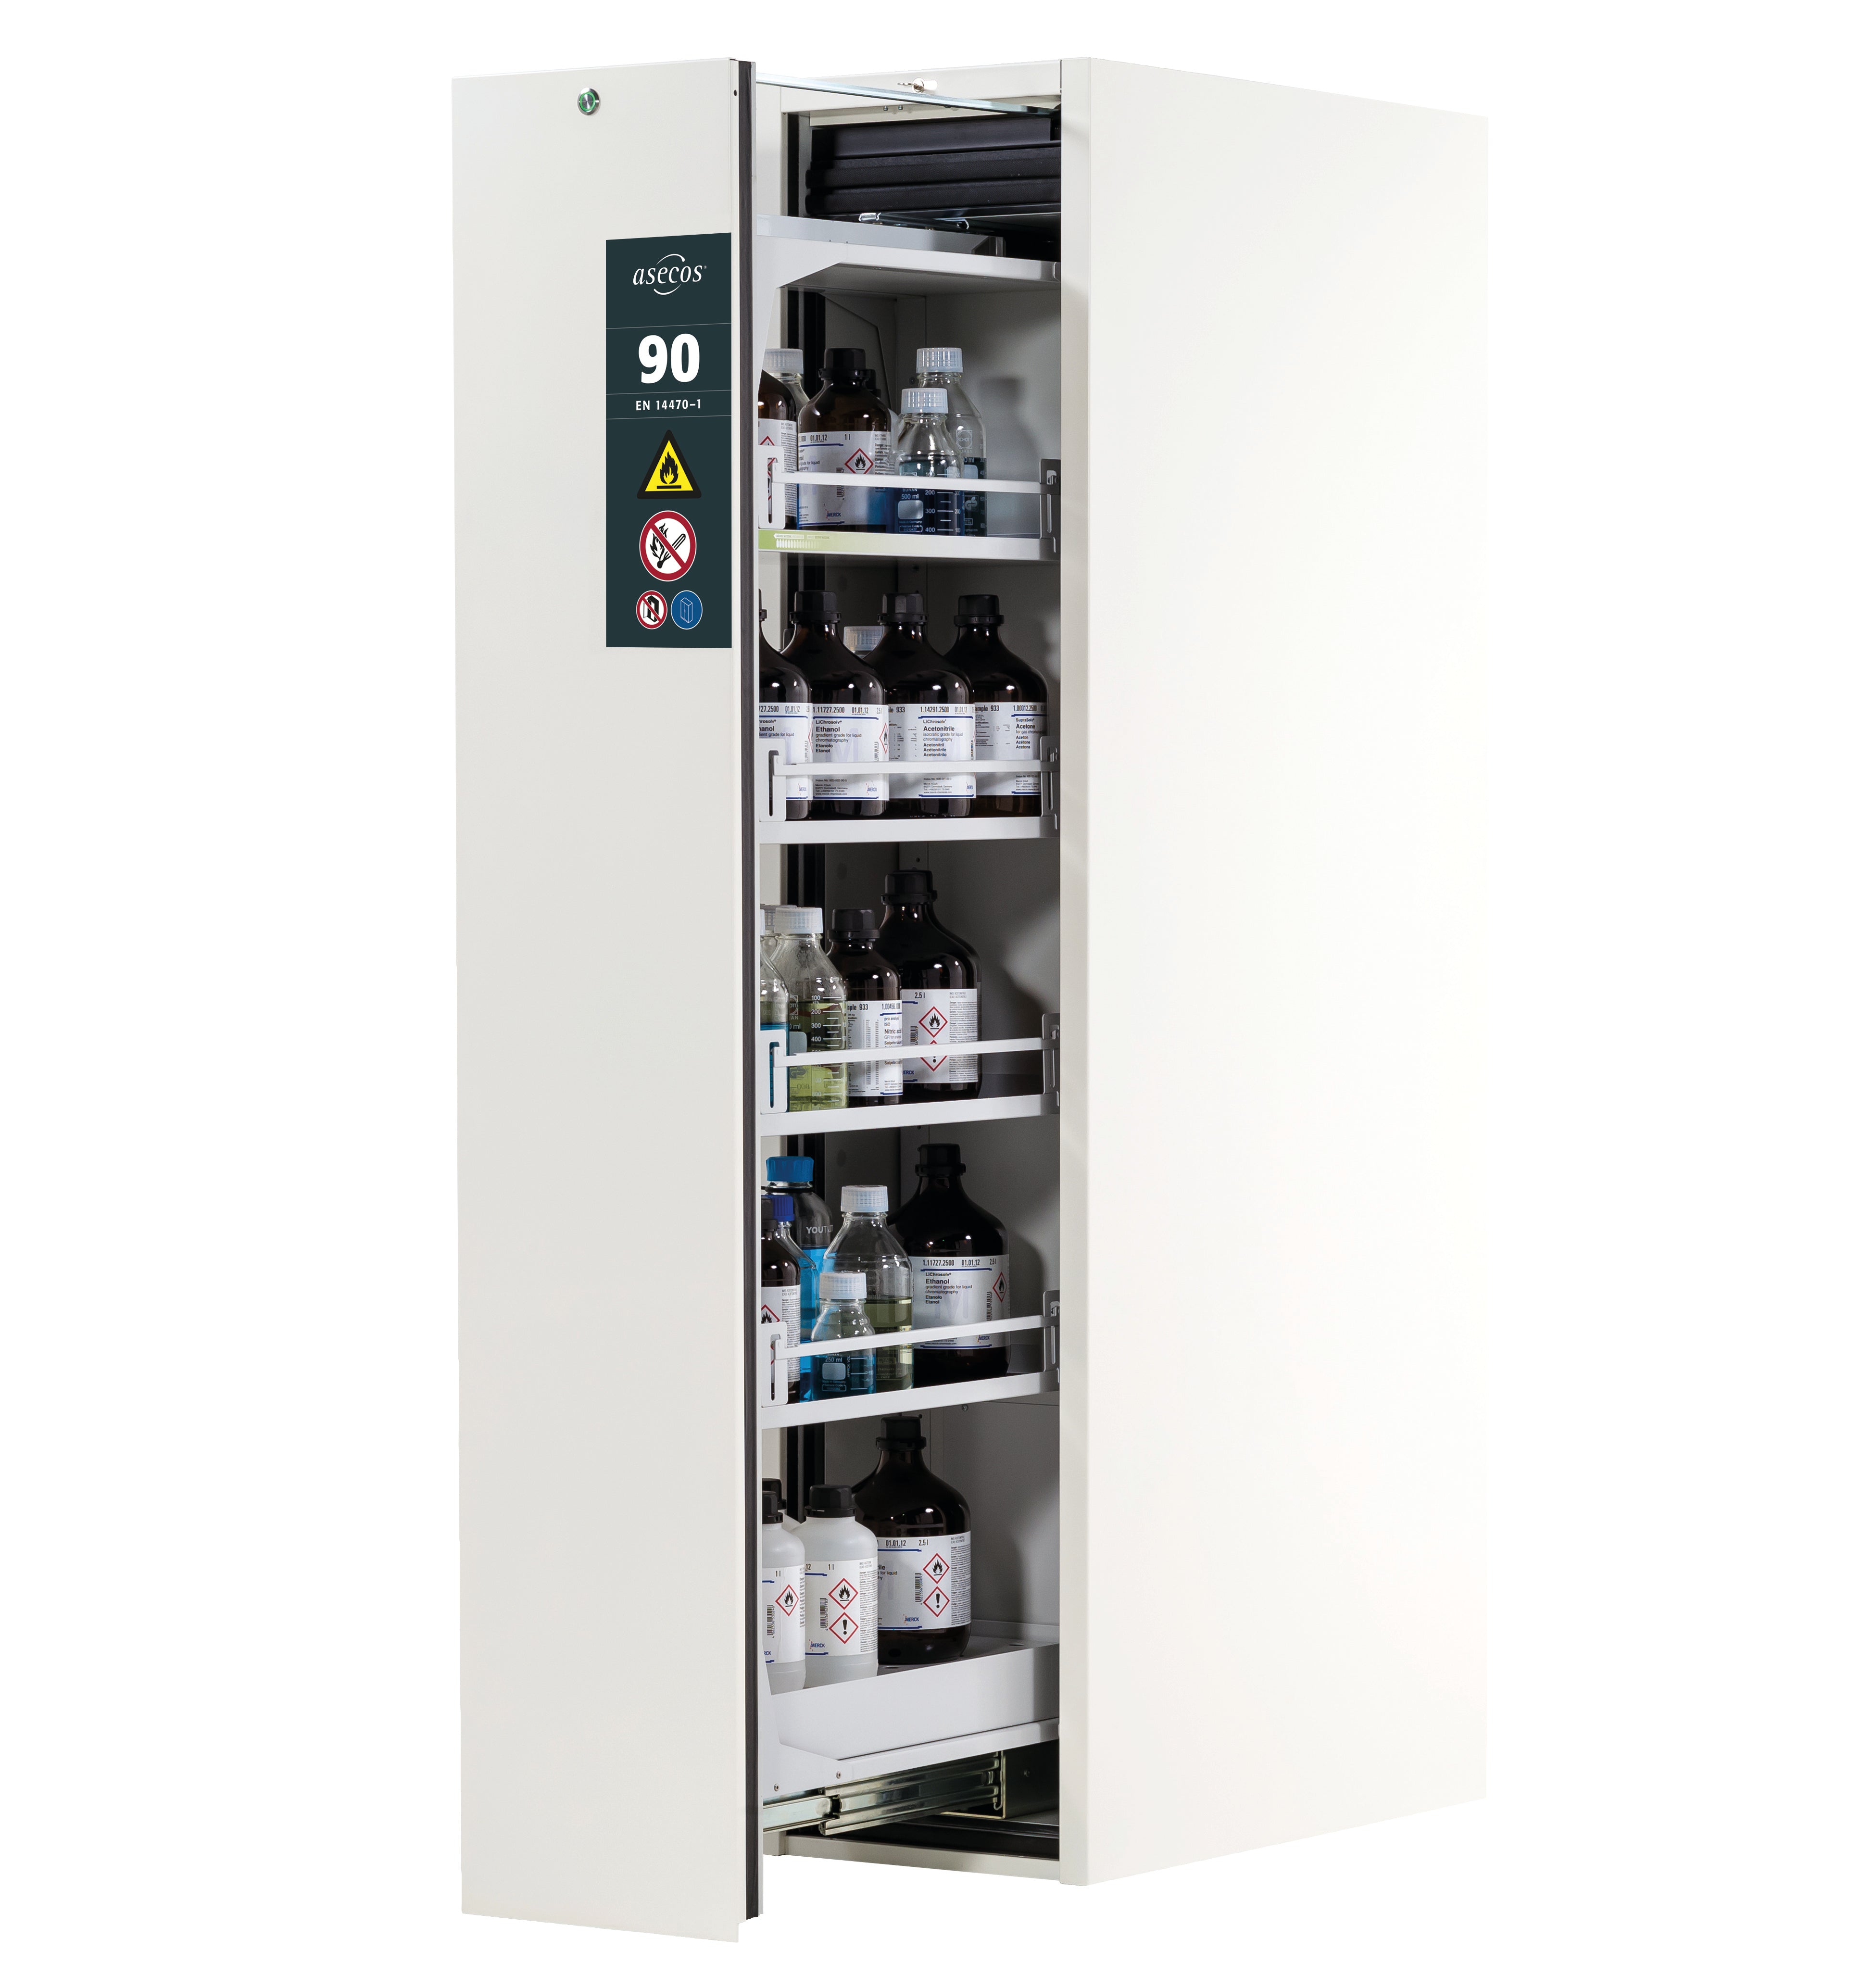 Type 90 safety cabinet V-MOVE-90 model V90.196.045.VDAC:0012 in laboratory white (similar to RAL 9016) with 4x standard shelves (sheet steel)